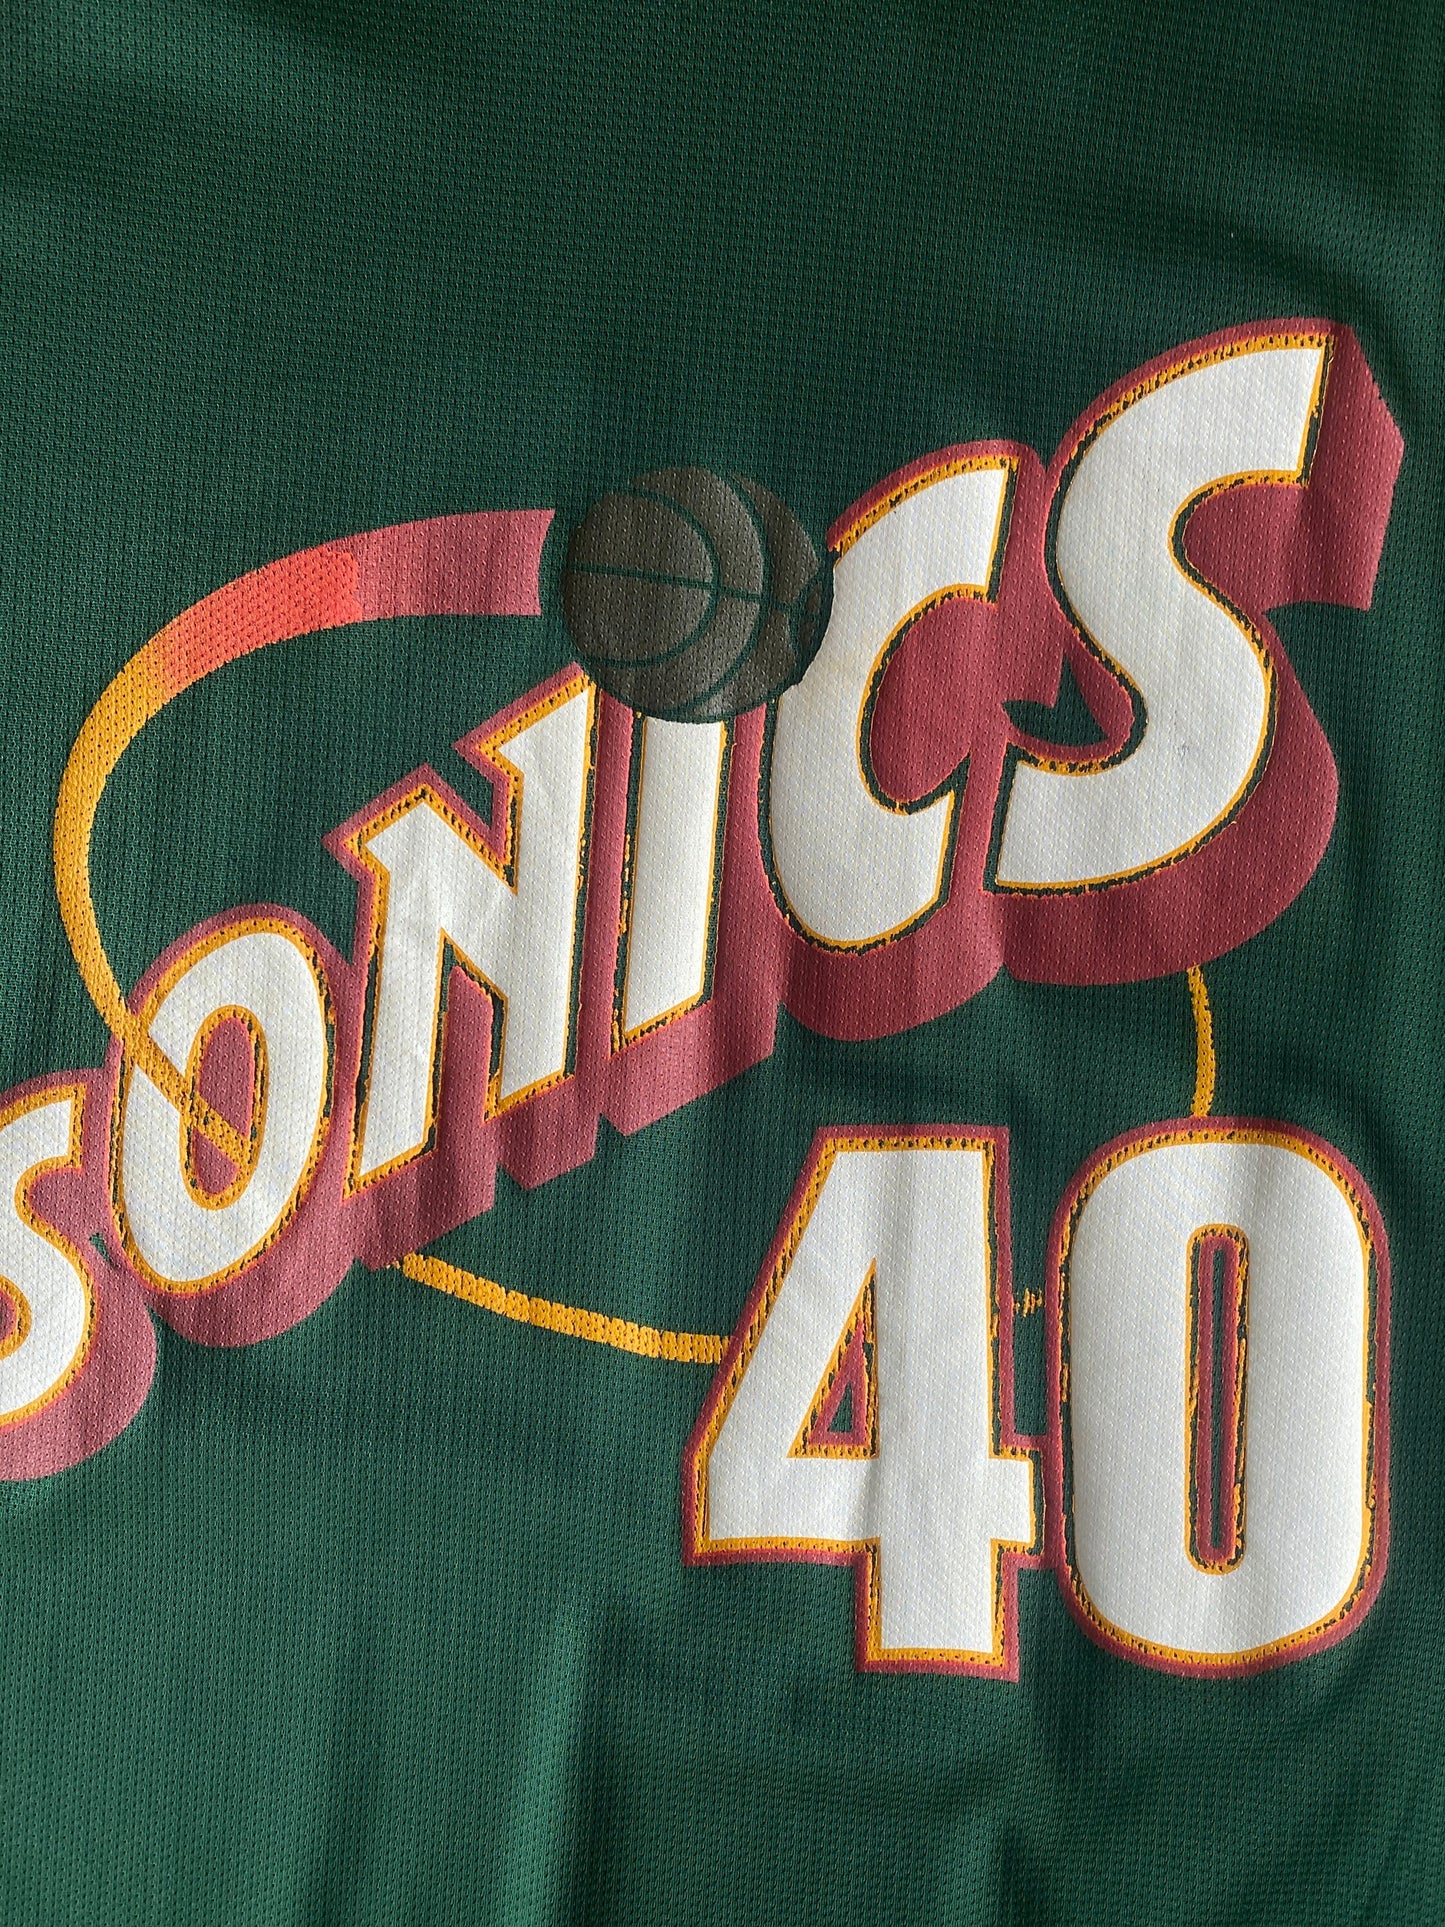 Vintage 90s NBA Champion Sonics Kemp #40 Jersey - Size 48 | Made in USA